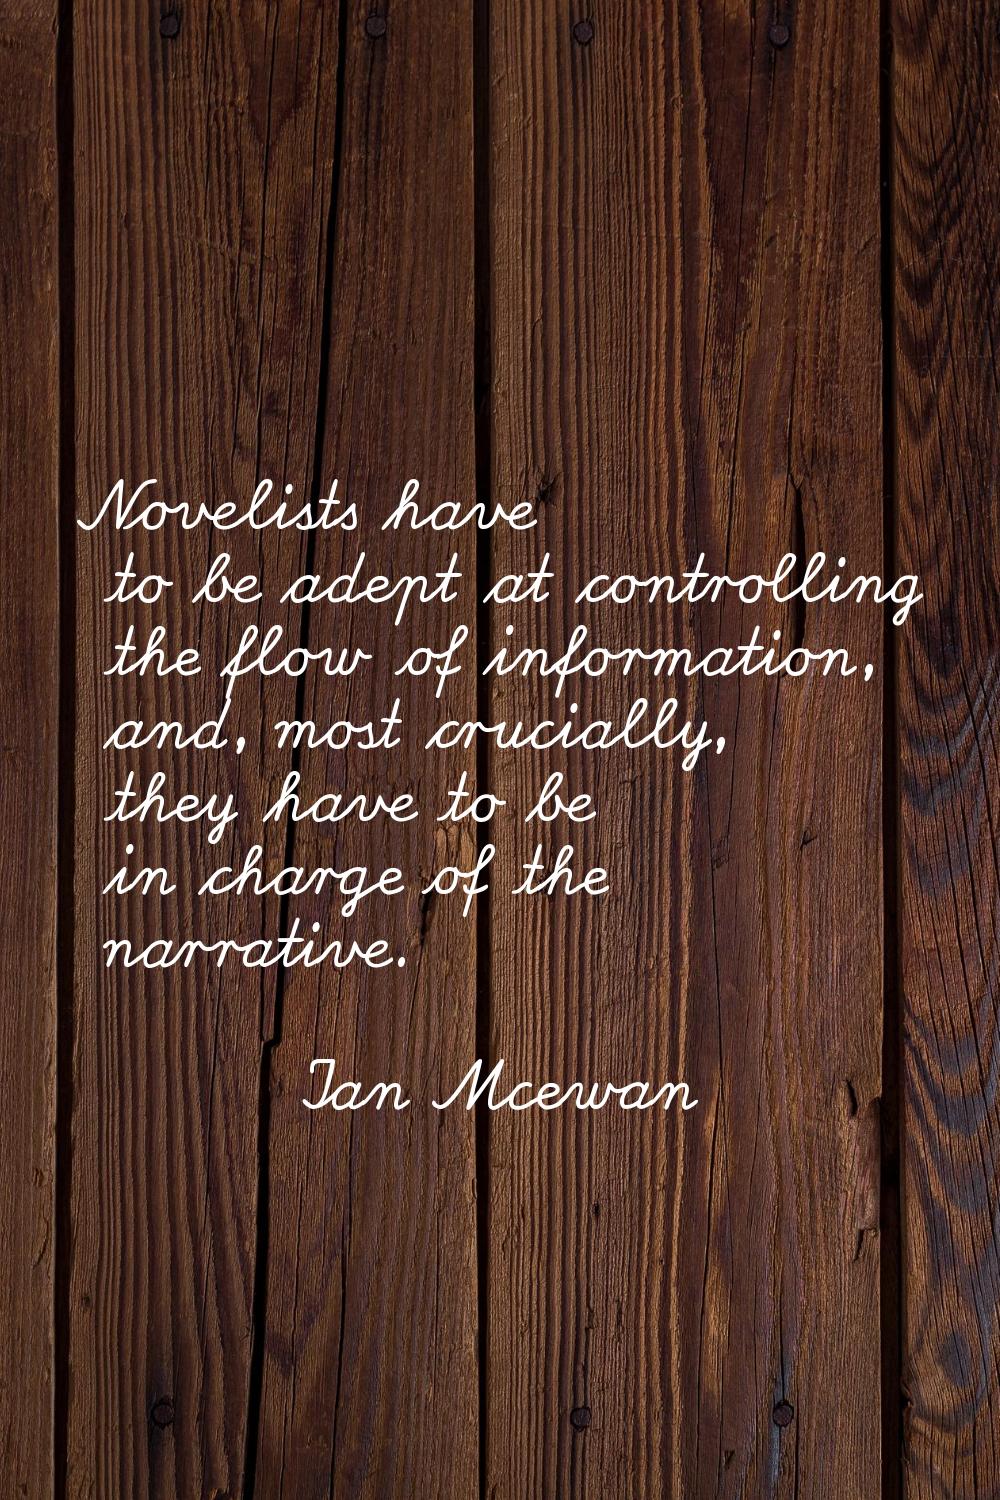 Novelists have to be adept at controlling the flow of information, and, most crucially, they have t